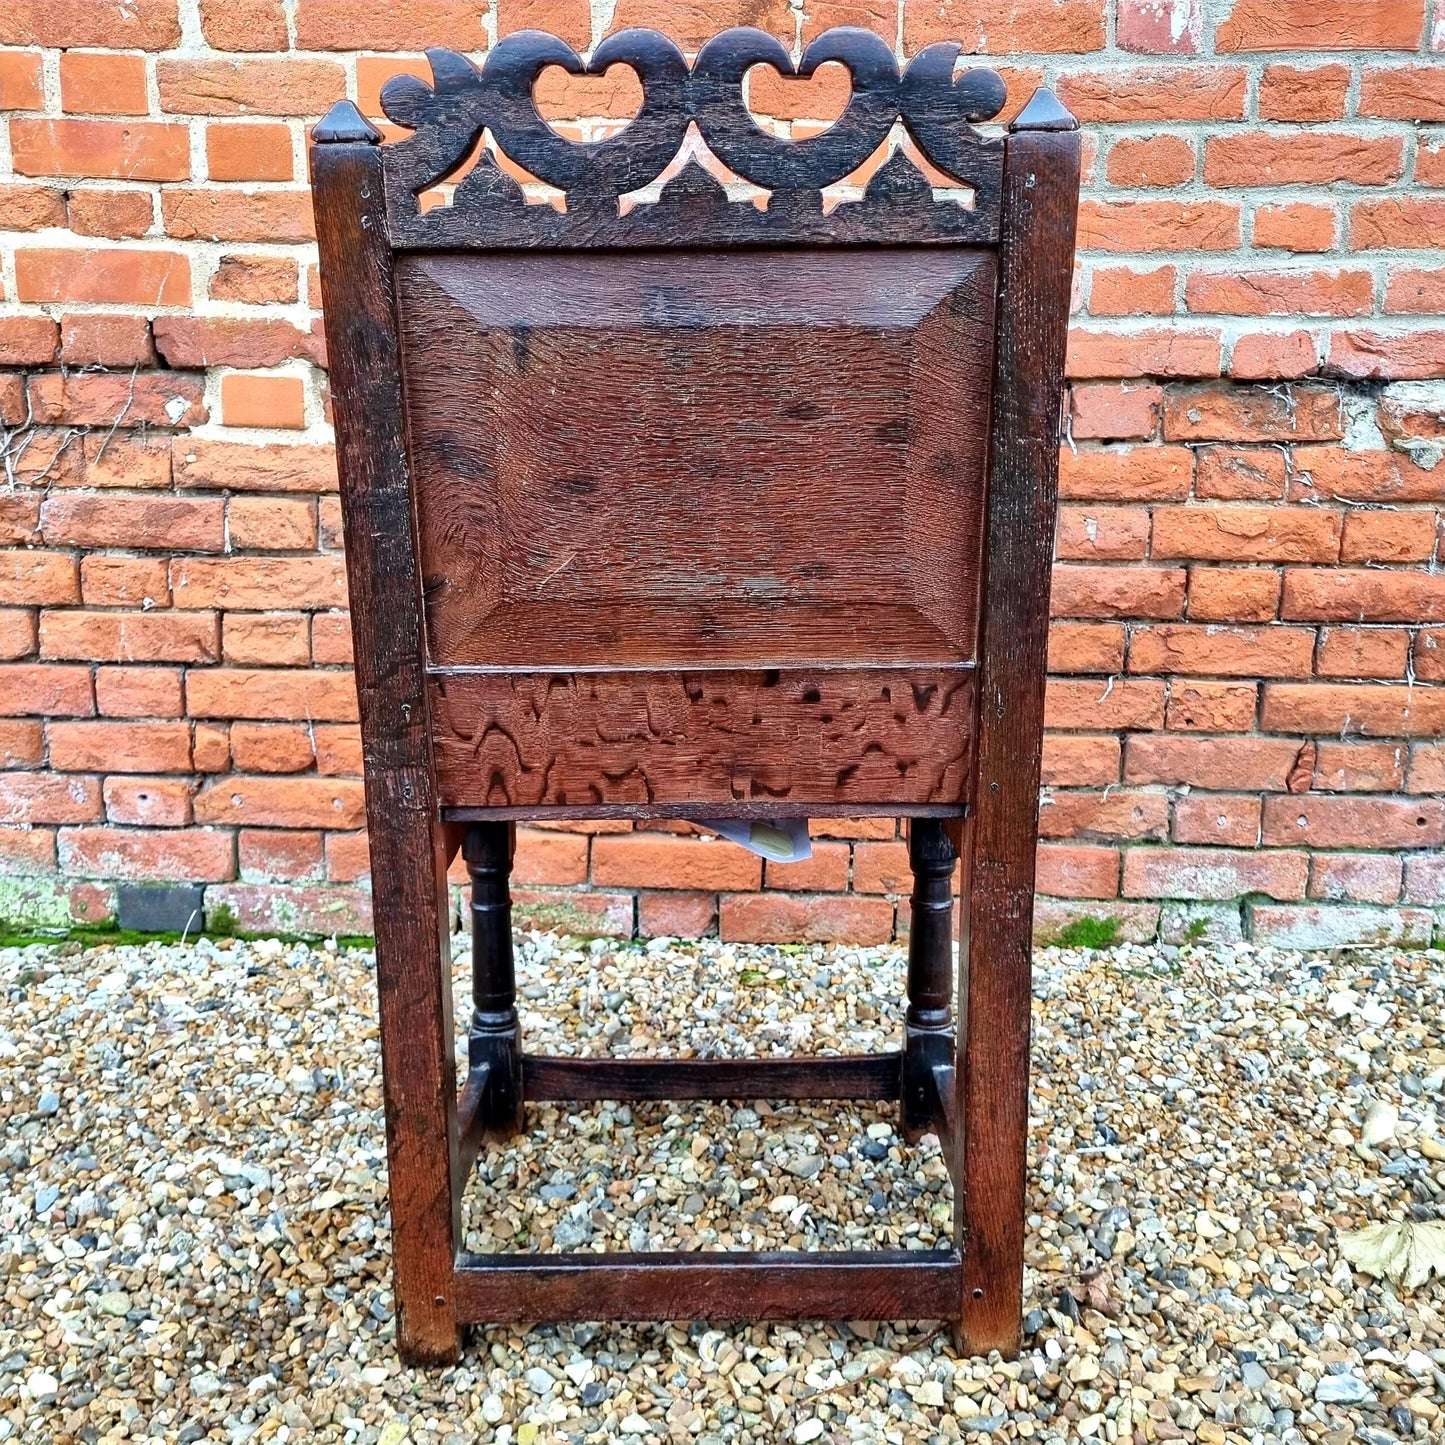 Mid 17th Century English Antique Oak Back Stool, Circa 1640. A similar example is held in the collection of the Victoria and Albert Museum, London